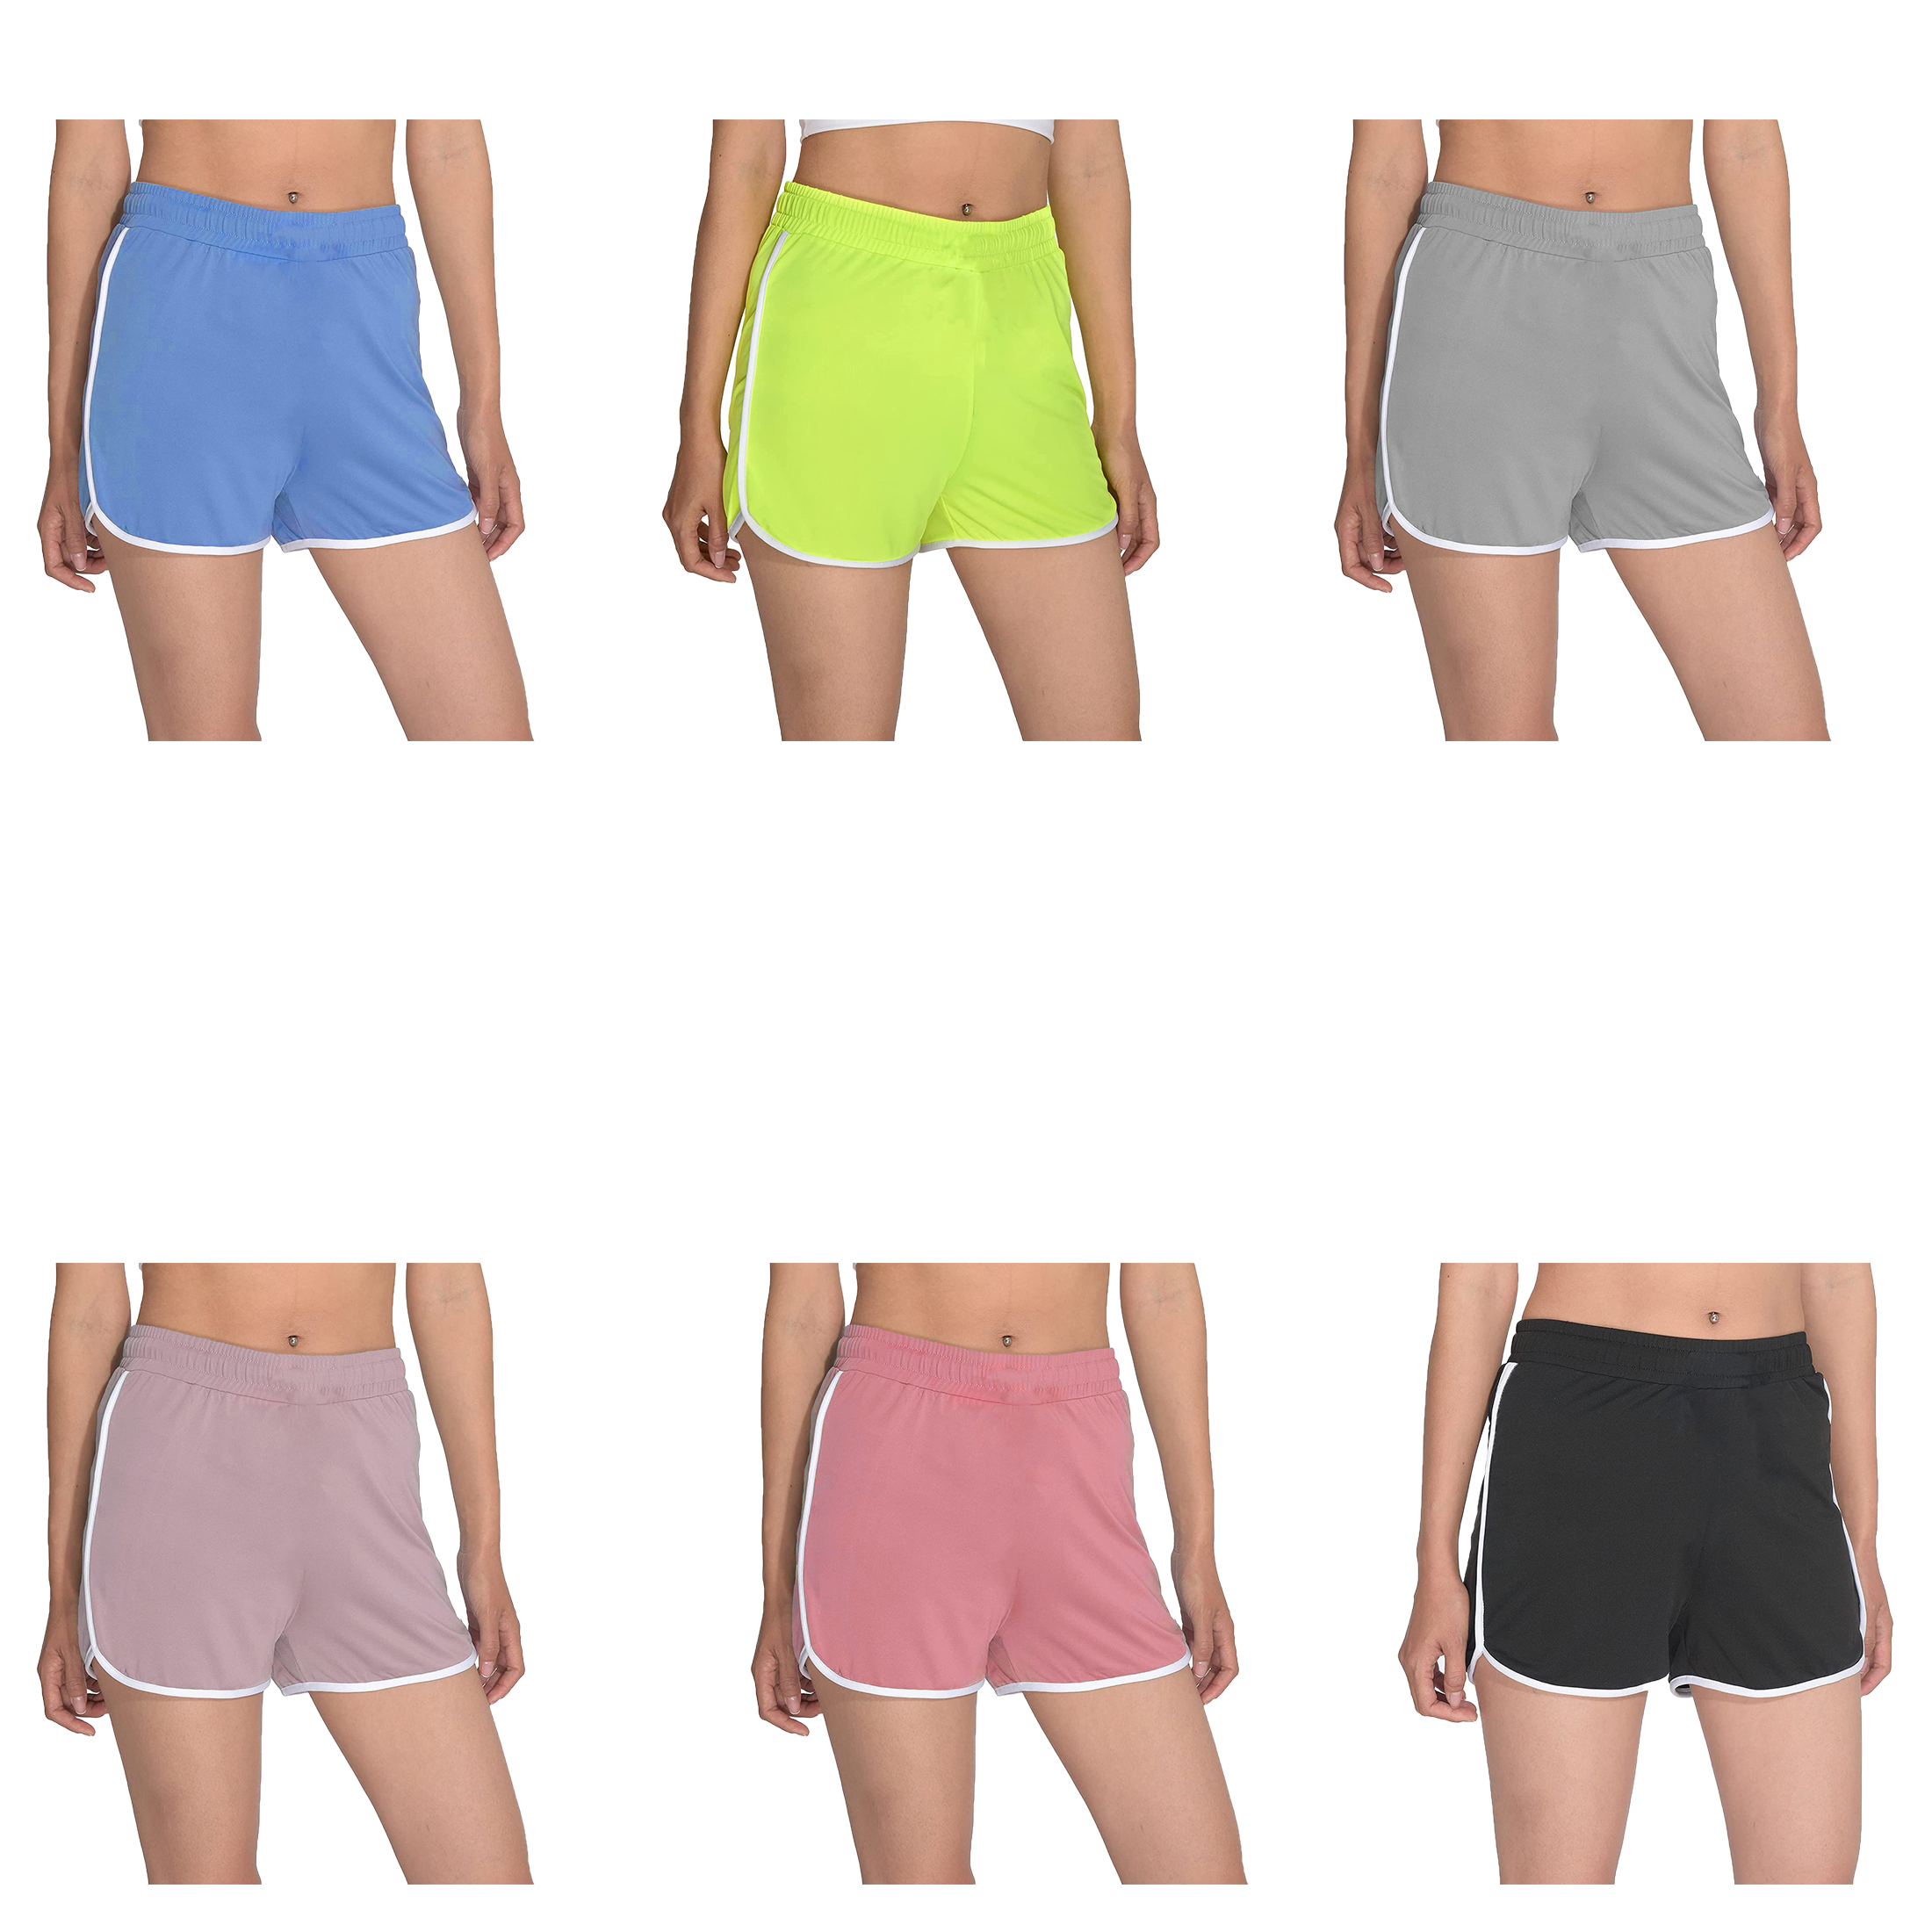 6-Pack: Women's Striped Dolphin Toe Soft Stylish Active Biker Gym Yoga Summer Shorts - Small